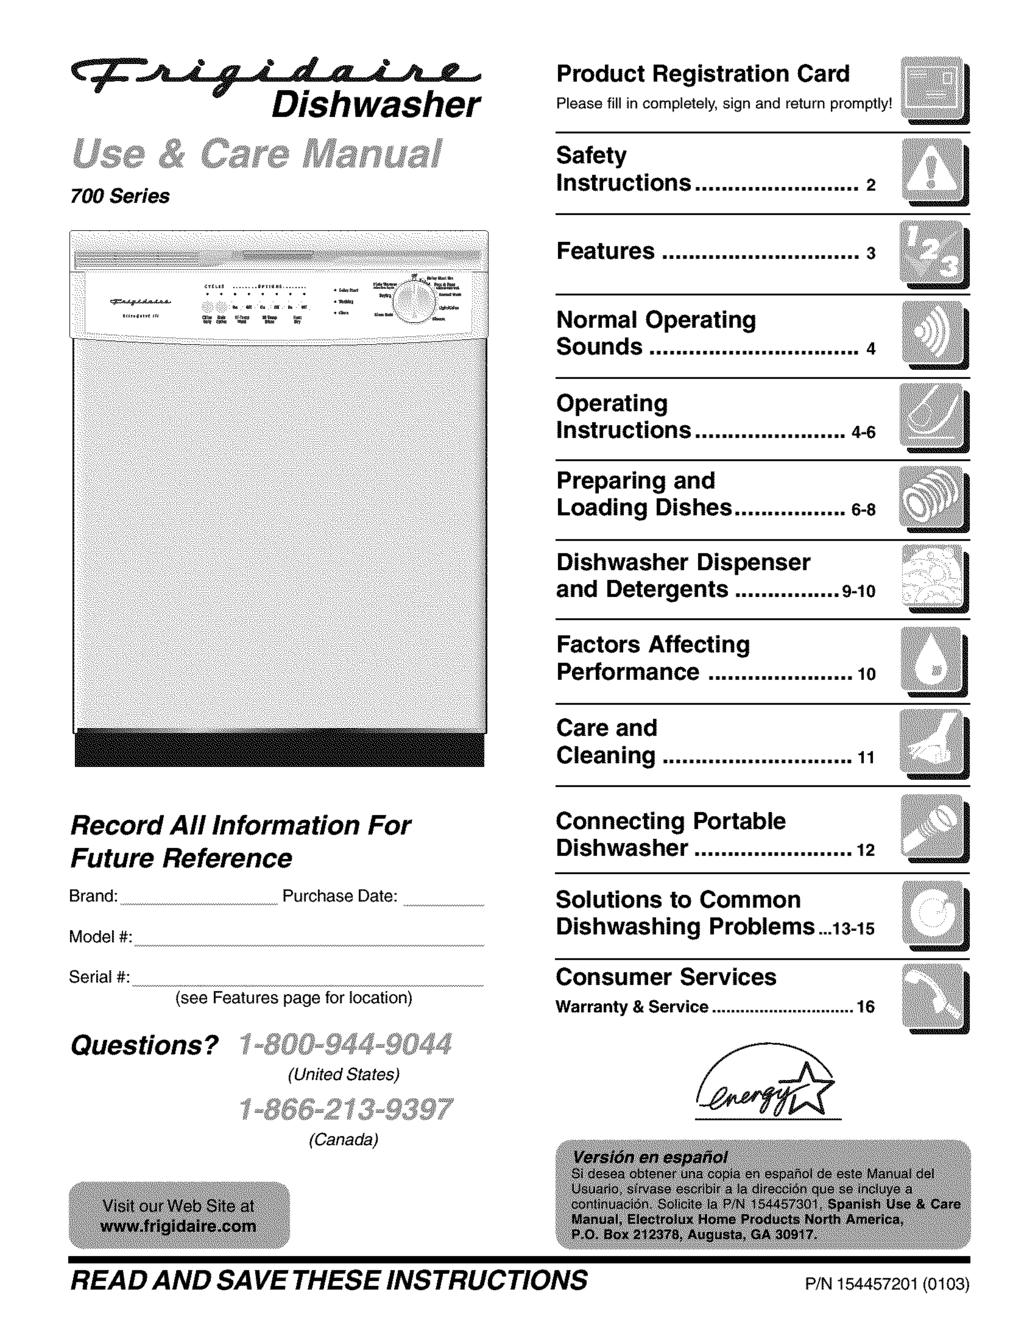 Dishwasher Product Registration Card Please fill in completely, sign and return promptly! 700 Series Safety Instructions... 2 Features... 3 Normal Operating Sounds... 4 Operating Instructions.